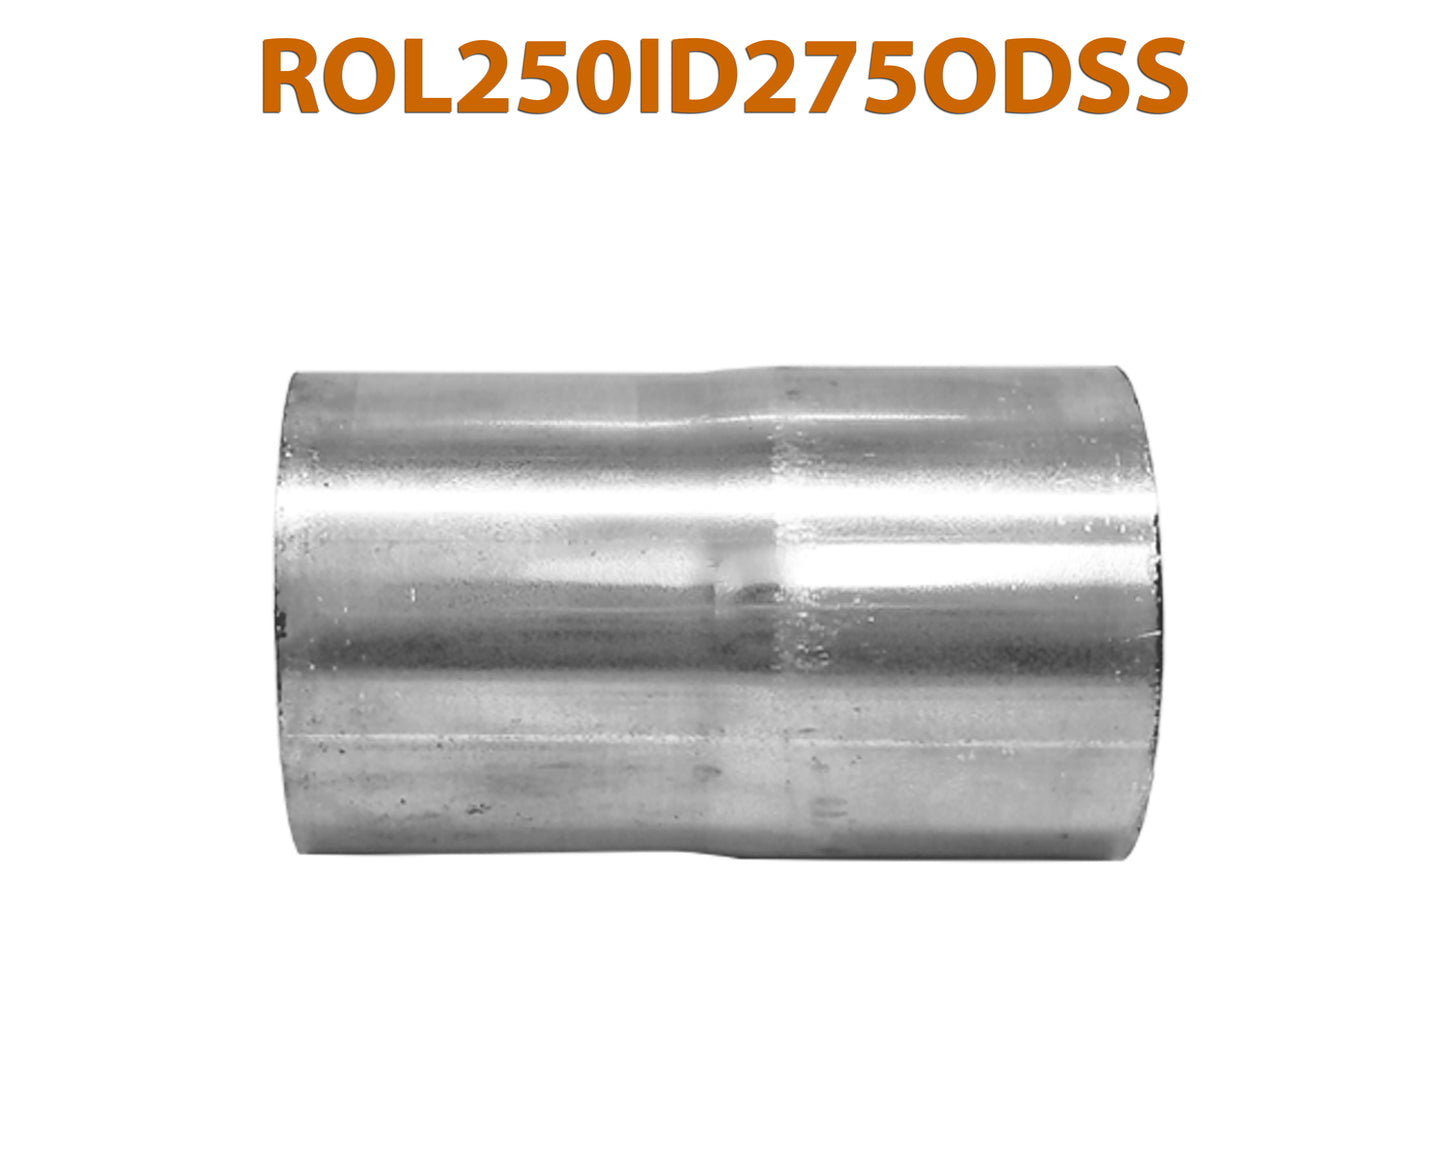 ROL250ID275ODSS 648215 2 1/2” ID to 2 3/4” OD Stainless Steel Exhaust Pipe to Component Adapter Reducer